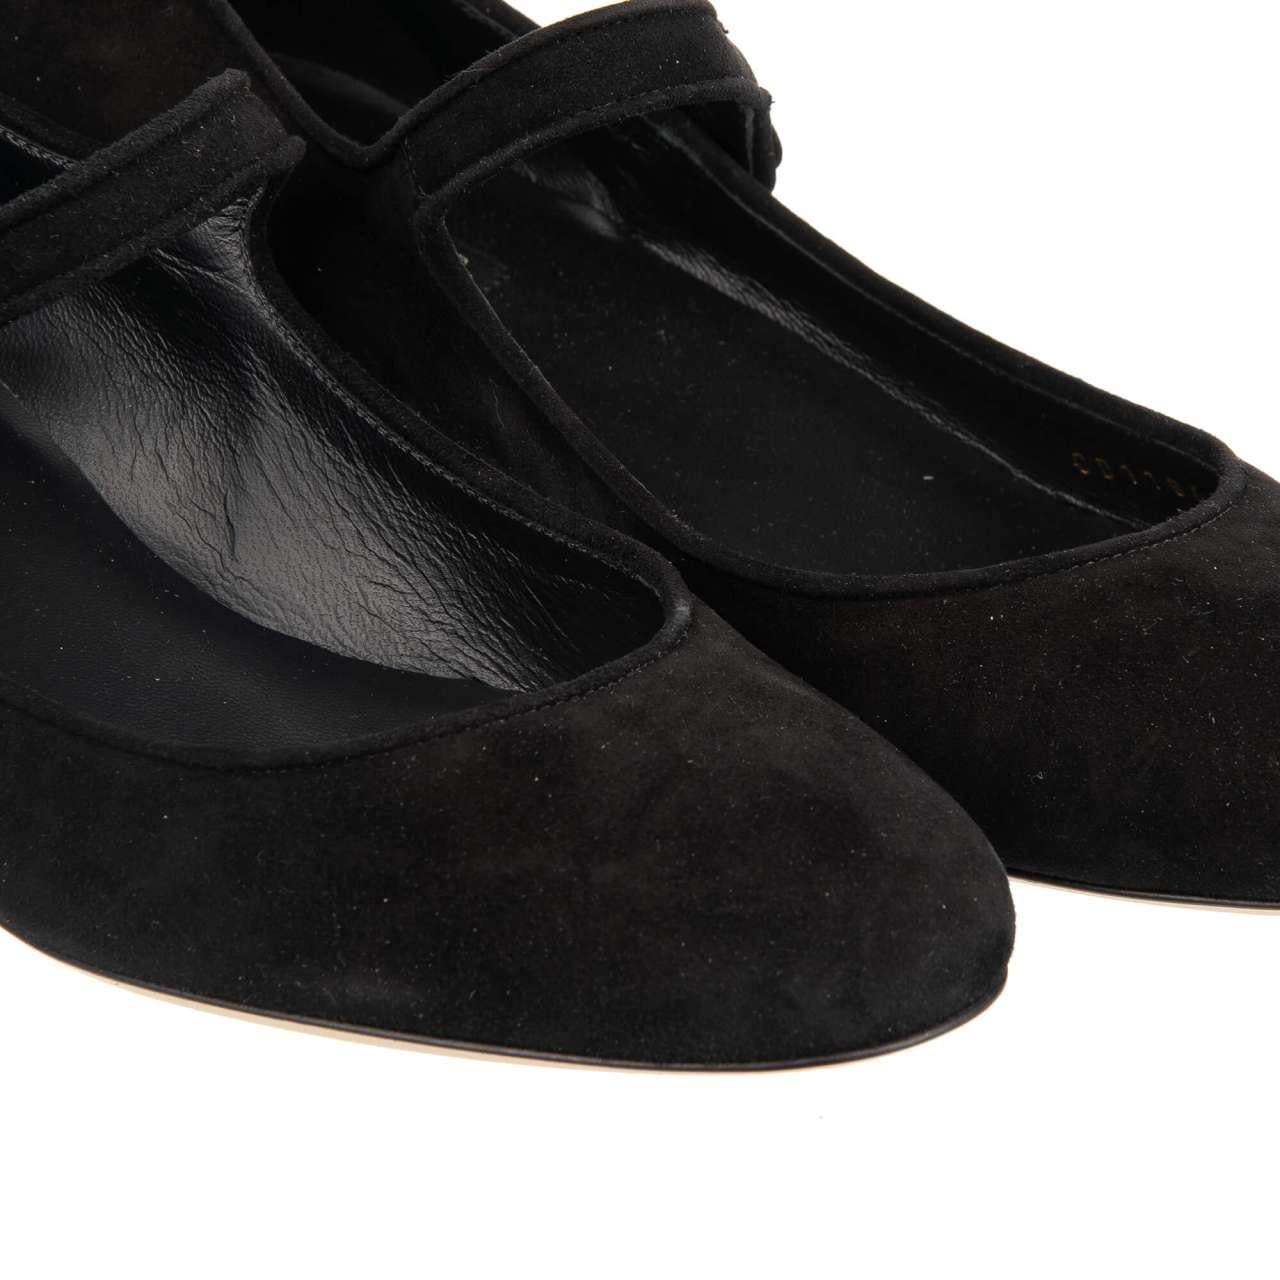 Dolce & Gabbana - Suede Leather Mary Jane Pumps VALLY Black EUR 37 In Excellent Condition For Sale In Erkrath, DE